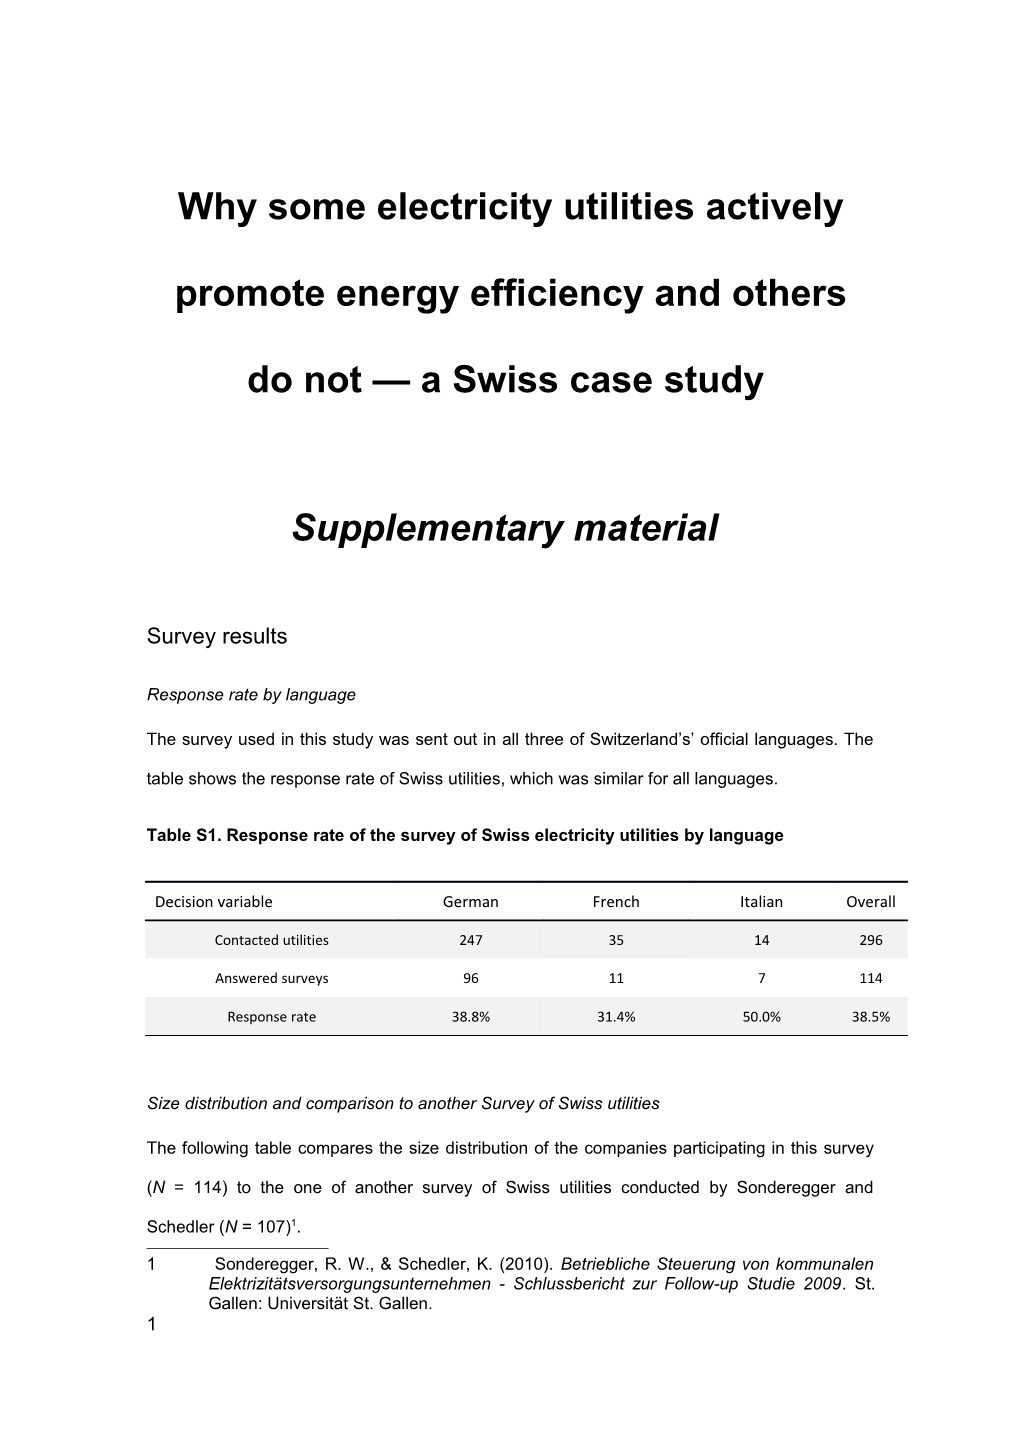 Table S1. Response Rate of the Survey of Swiss Electricity Utilities by Language